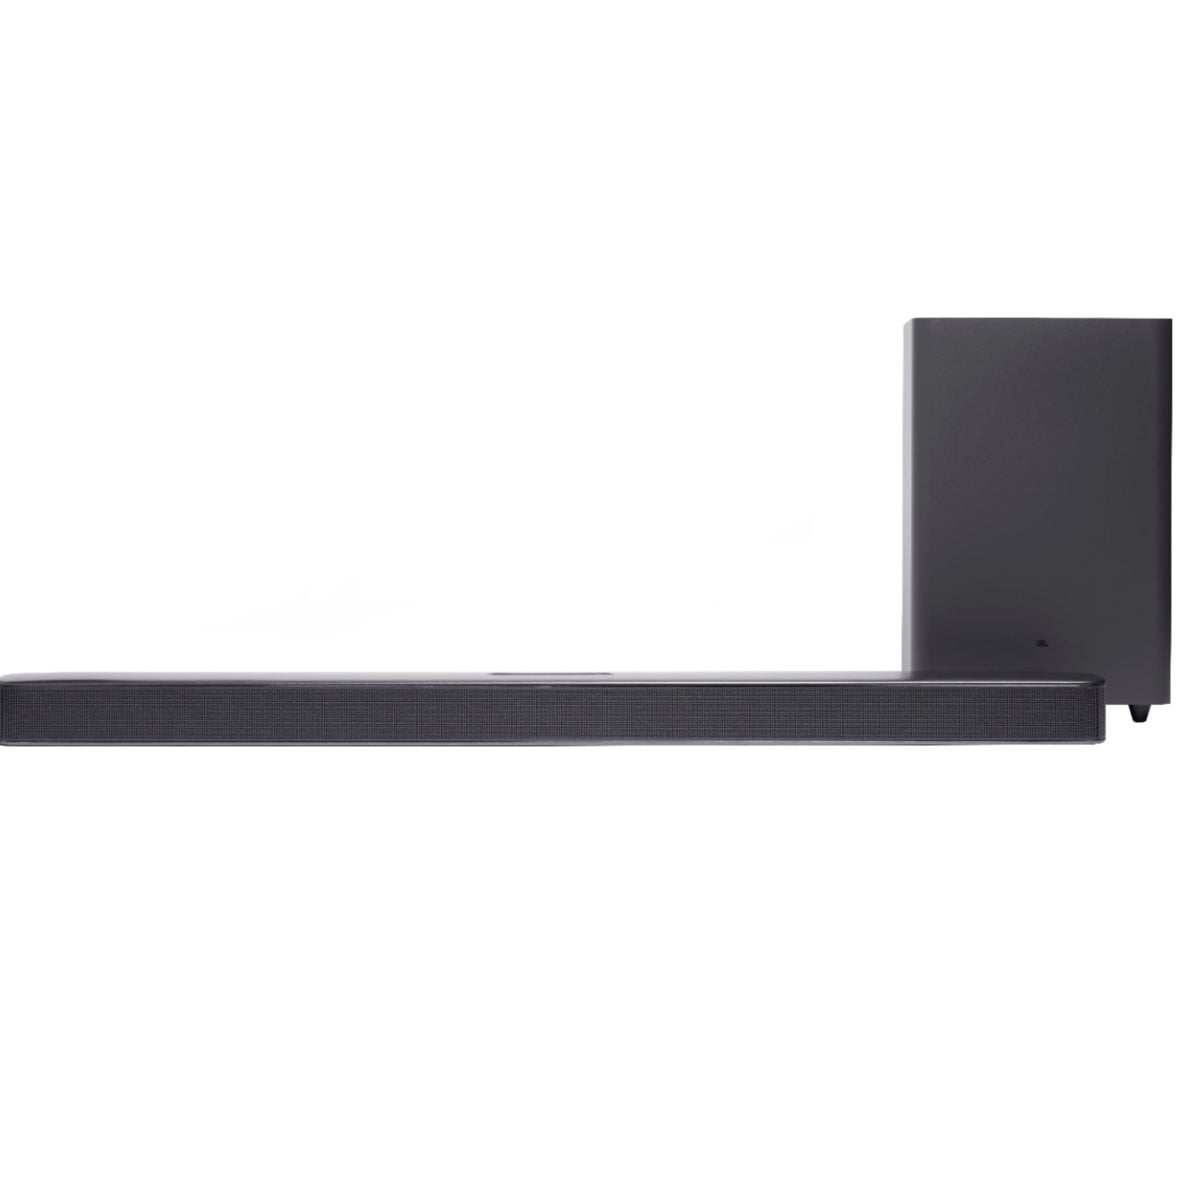 6395178Cv11D Scaled Jbl &Lt;H1&Gt;Jbl - 2.1-Channel Soundbar With Wireless Subwoofer And Dolby Digital - Black&Lt;/H1&Gt; Elevate Your Cinematic Experience With This 2.1-Channel Jbl Bar Deep Bass Soundbar. The Wireless Subwoofer And Set Of Tweeters Fill Your Room With Immersive Audio, While Bluetooth Connectivity Lets You Stream Music Wirelessly. This Jbl Bar Deep Bass Soundbar Features A Low-Profile Design For A Contemporary Look, And Built-In Dolby Digital Offers Increased Clarity. Jbl Soundbar Jbl - 2.1-Channel Soundbar With Wireless Subwoofer And Dolby Digital - Black